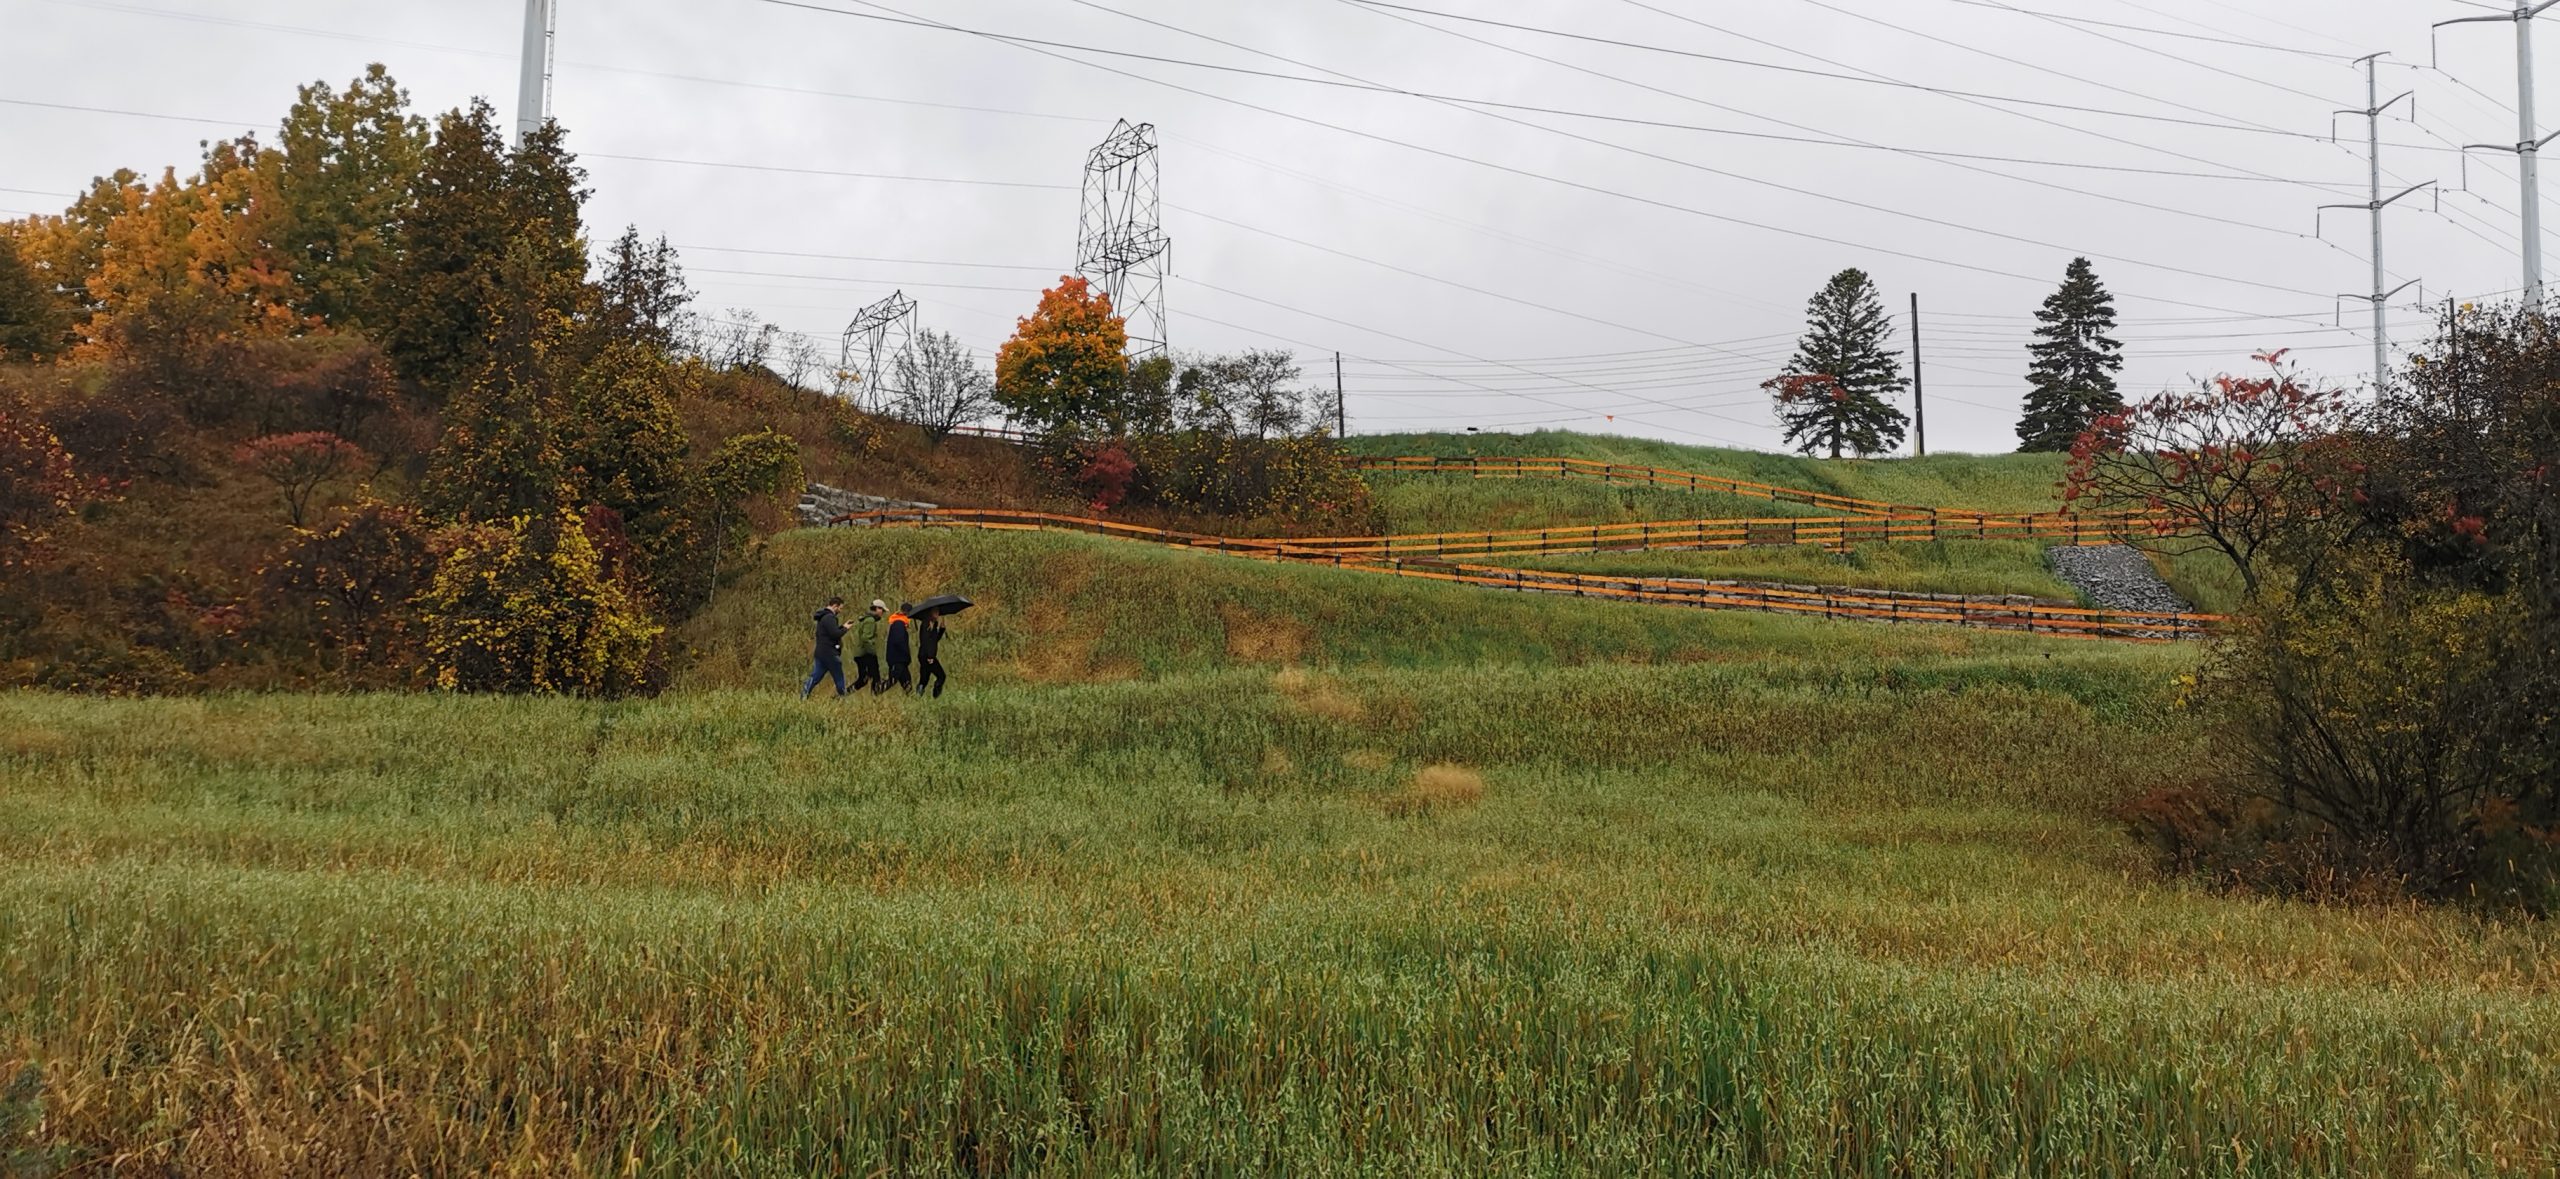 Photo of Highland Creek Trail showing the tall grass in the foreground and the curved trail with food fence in the background. 